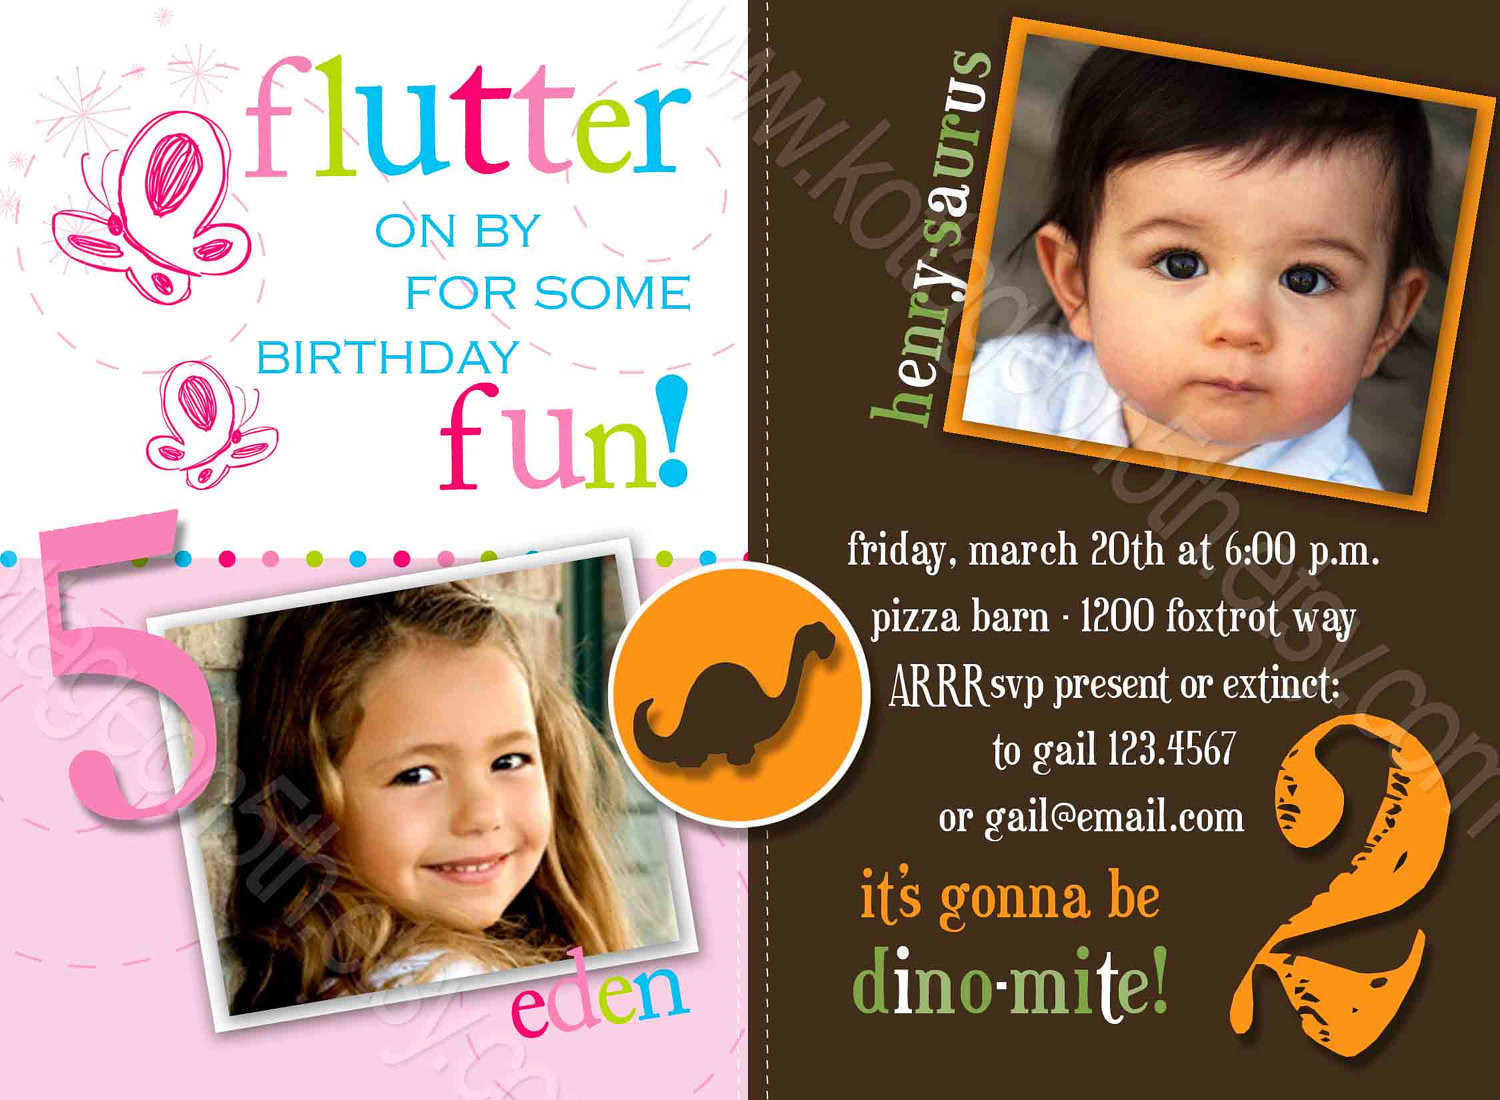 Joint Birthday Party Invitations
 Joint Birthday Party Invitations – FREE Printable Birthday